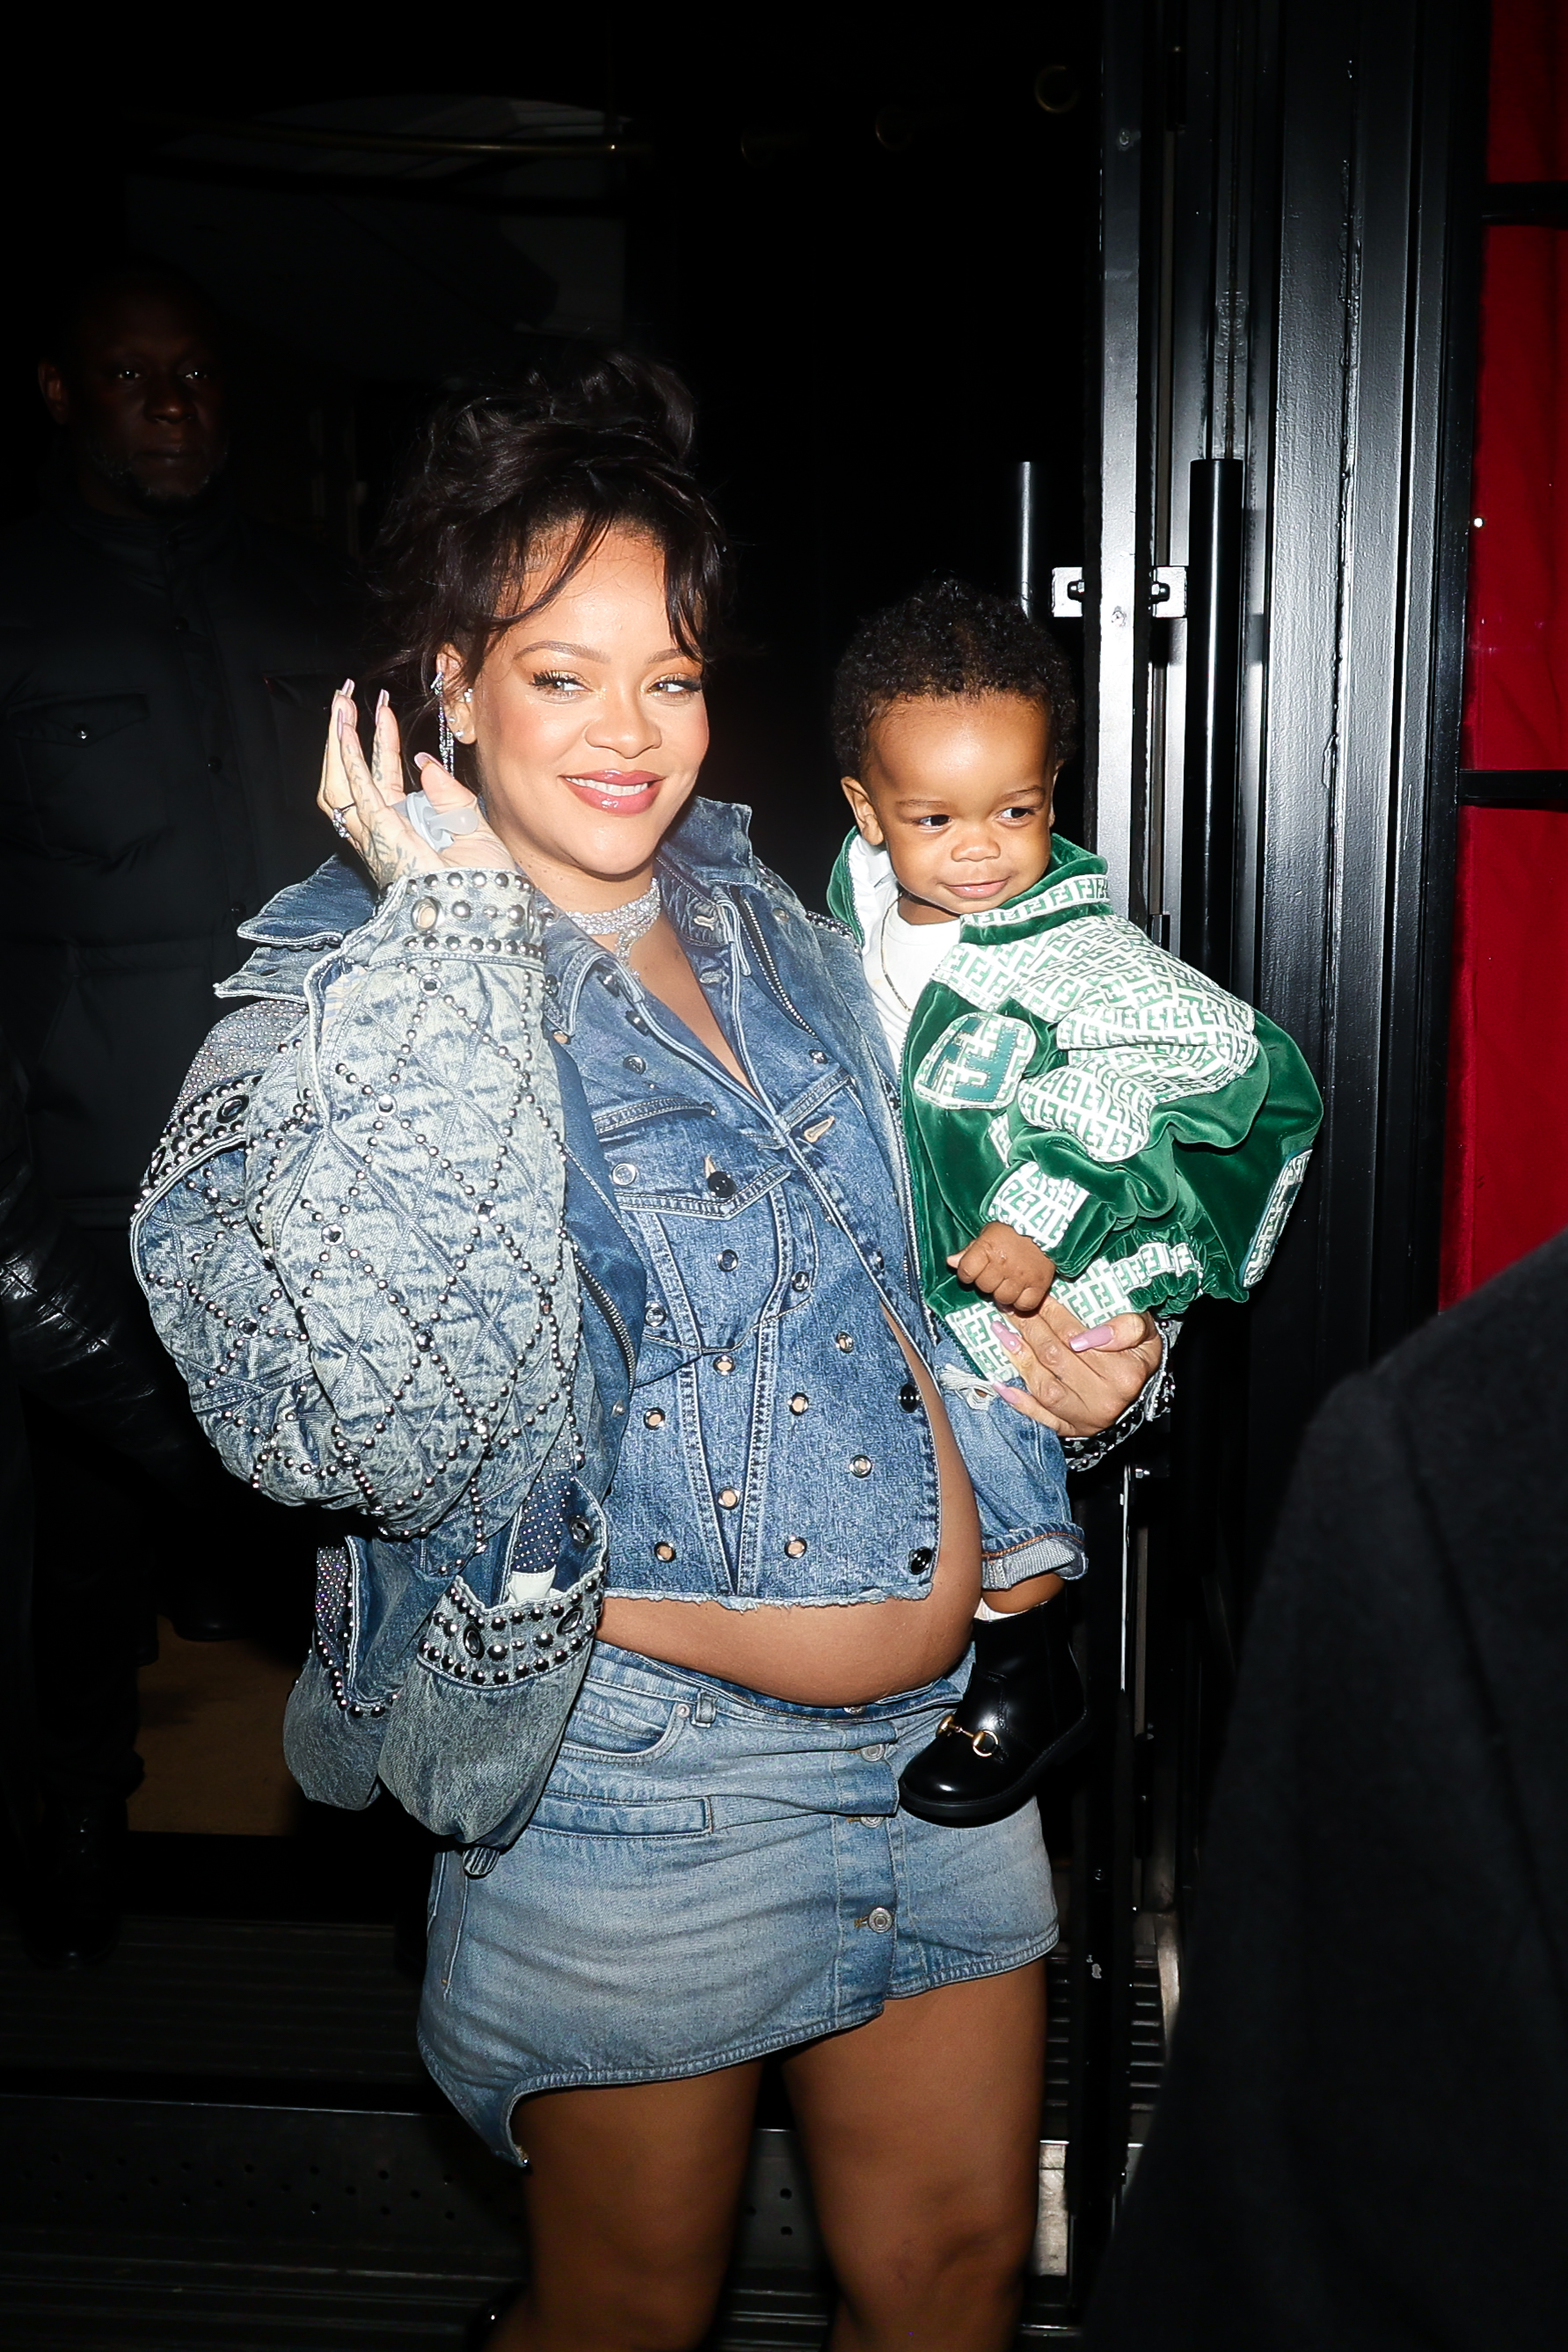 Rihanna keeping another pregnancy a secret would be par for the course as she kept her pregnancy with Riot under wraps for months